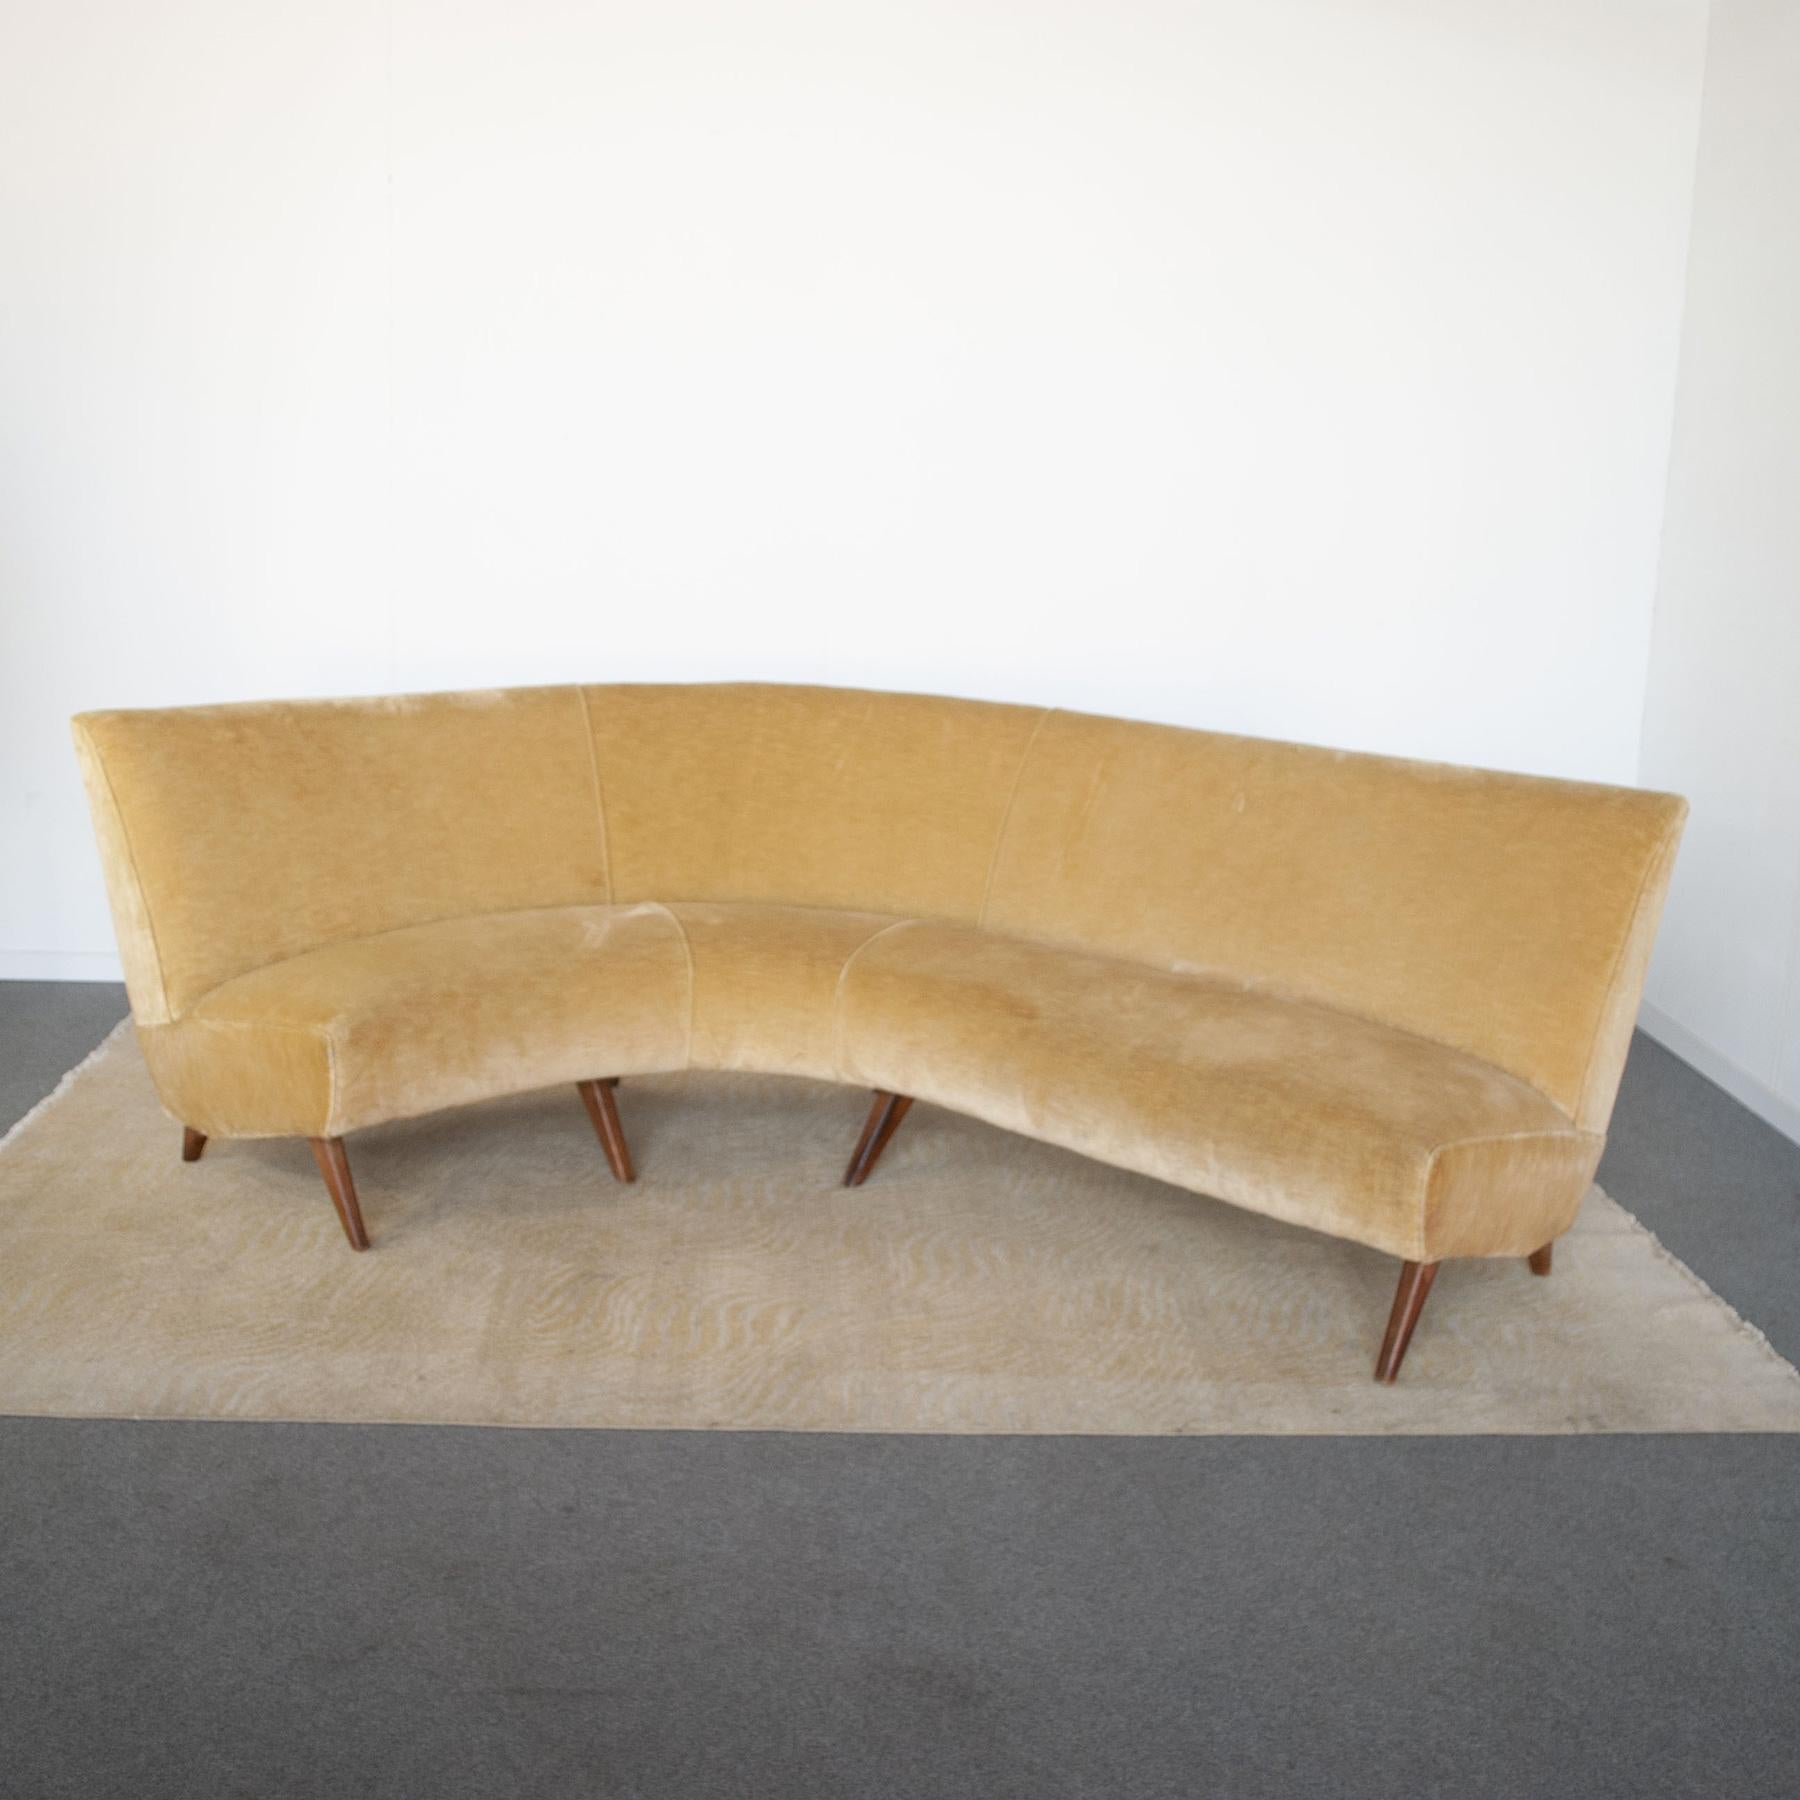 Curved sofa upholstered in velvet original of the time in excellent condition production Malatesta & Masson Rome late 50s.

Additional dimensions: backrest curve 343 cm – seat curve 210 cm.